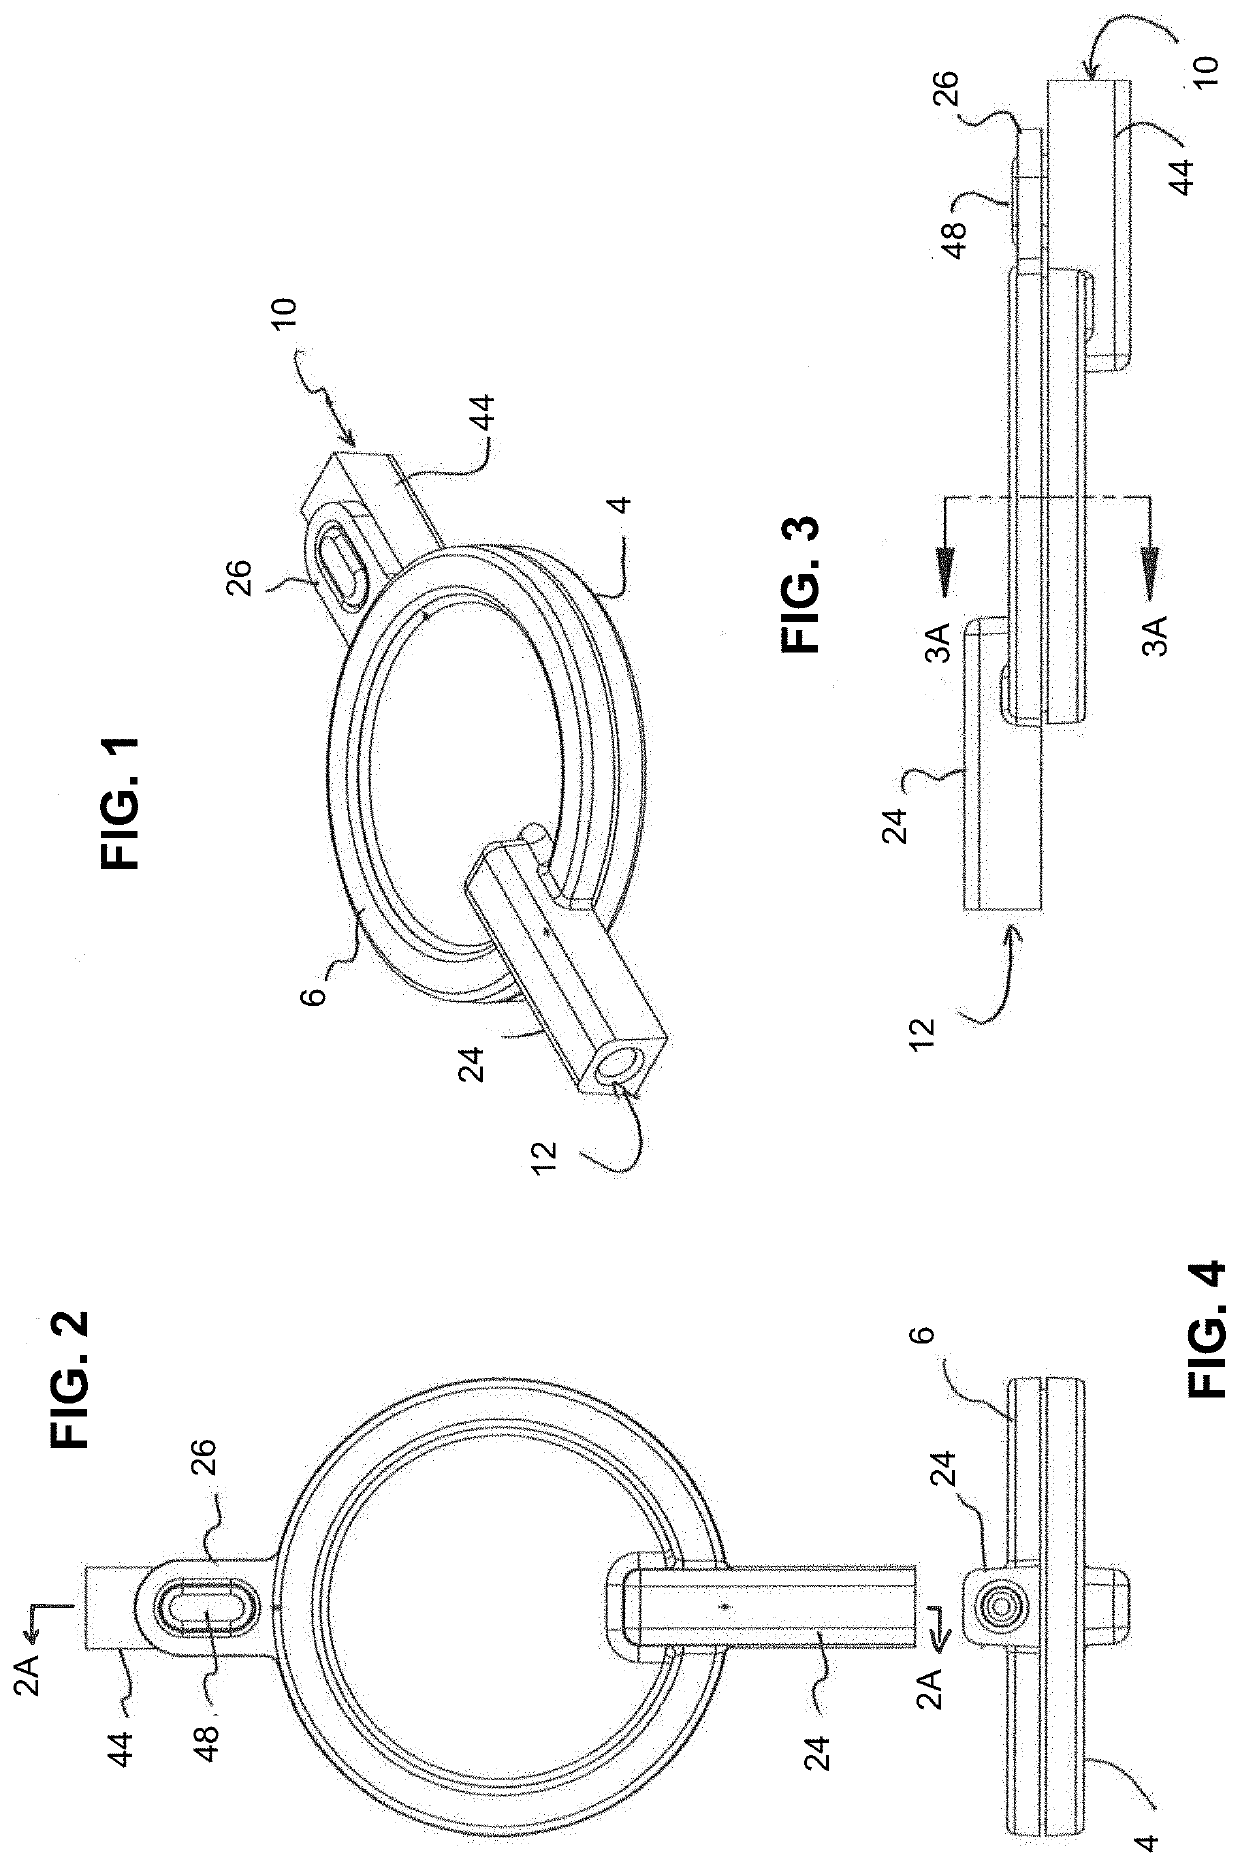 Hydrophobic gas permeable filter assembly for microfiltration of exhaled gases